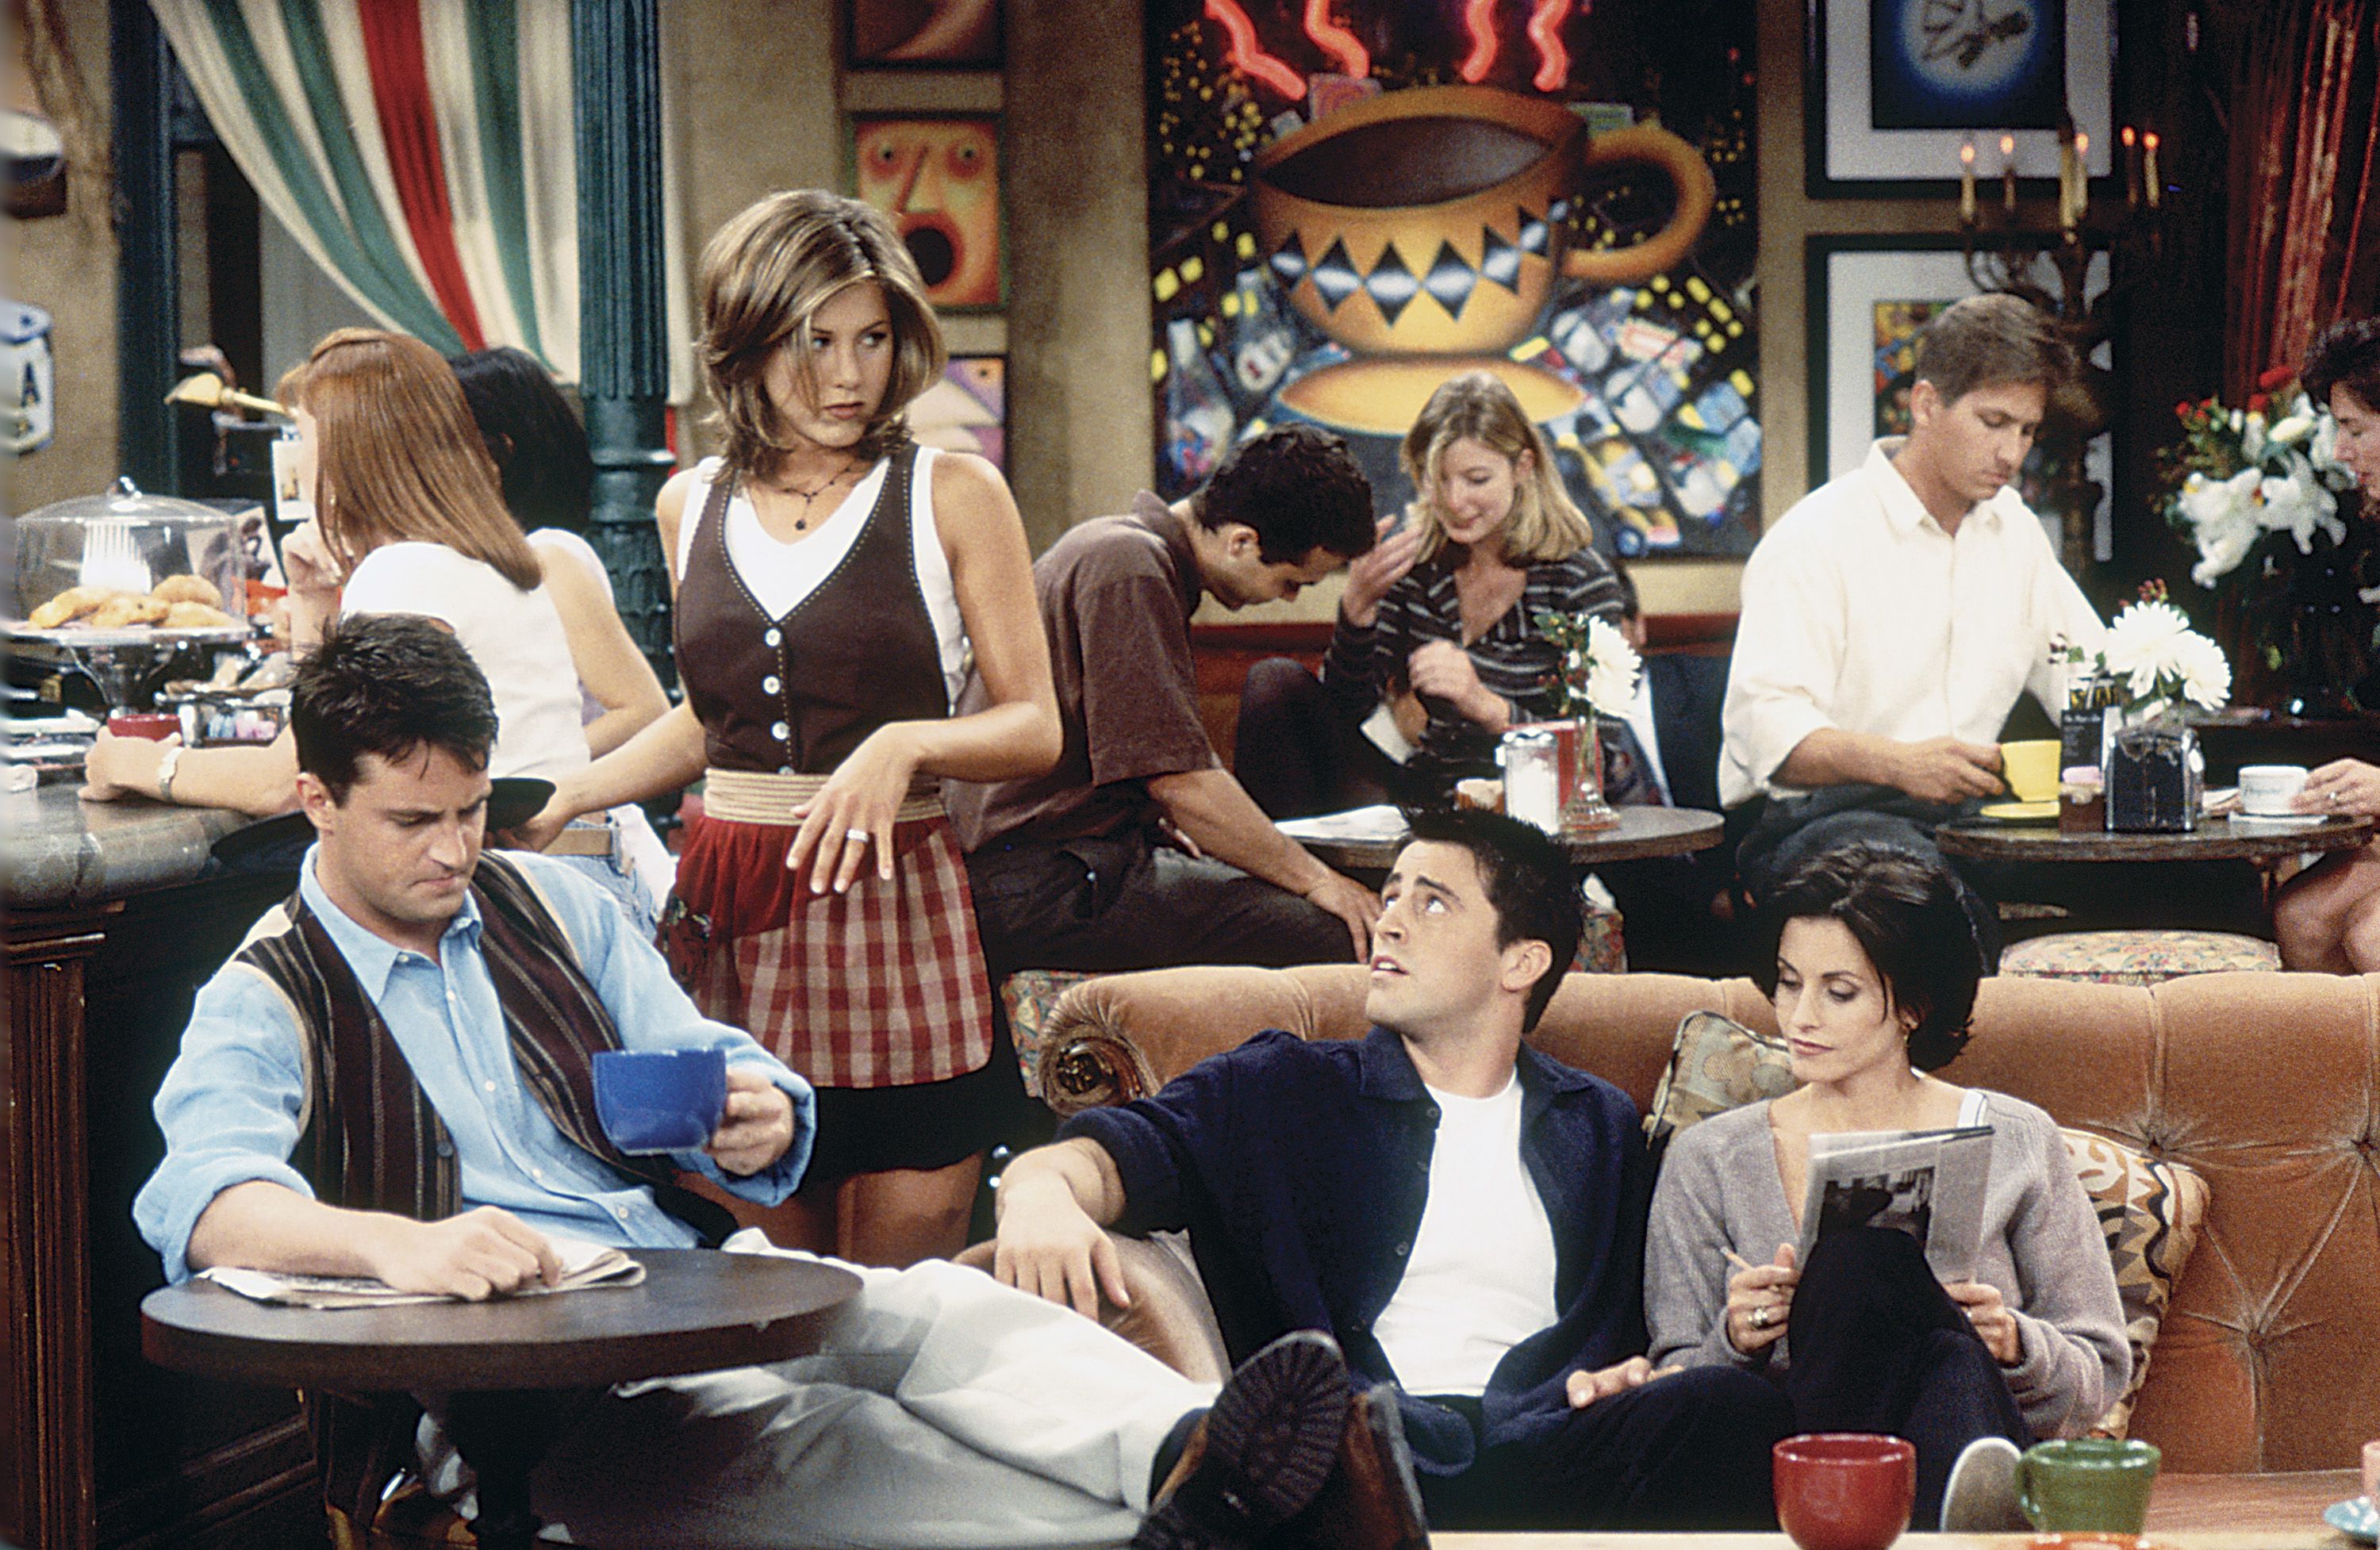 50 Friends Facts Every Superfan Should Know - Friends TV Show Trivia